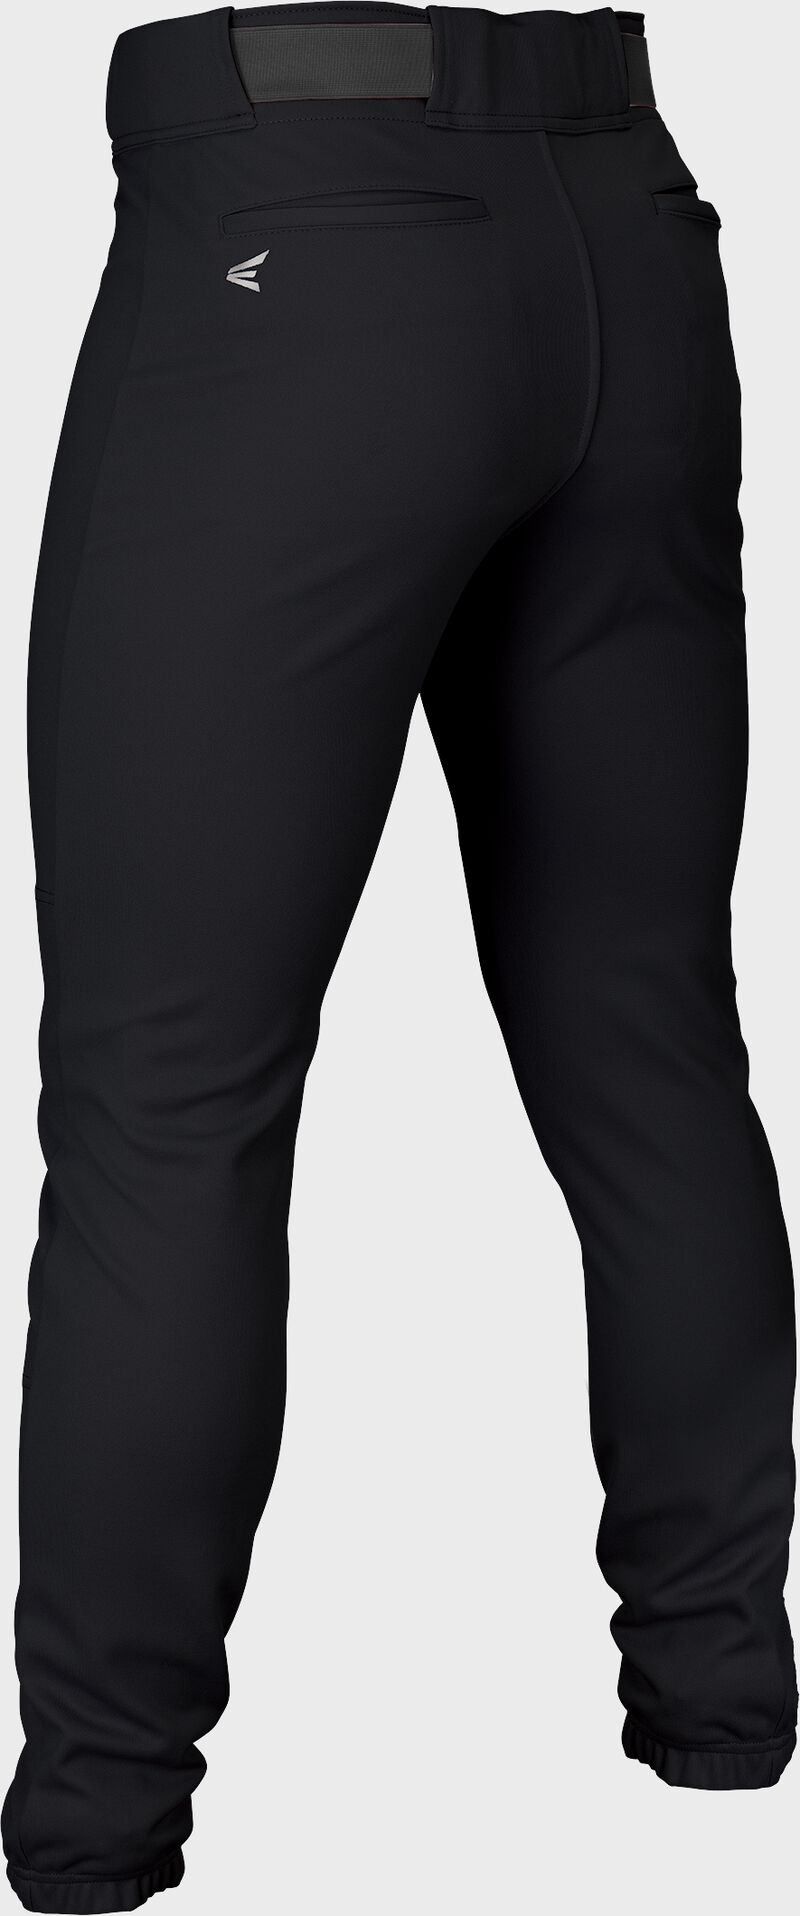 Rival+ Pro Taper Pant Youth BLACK S loading=